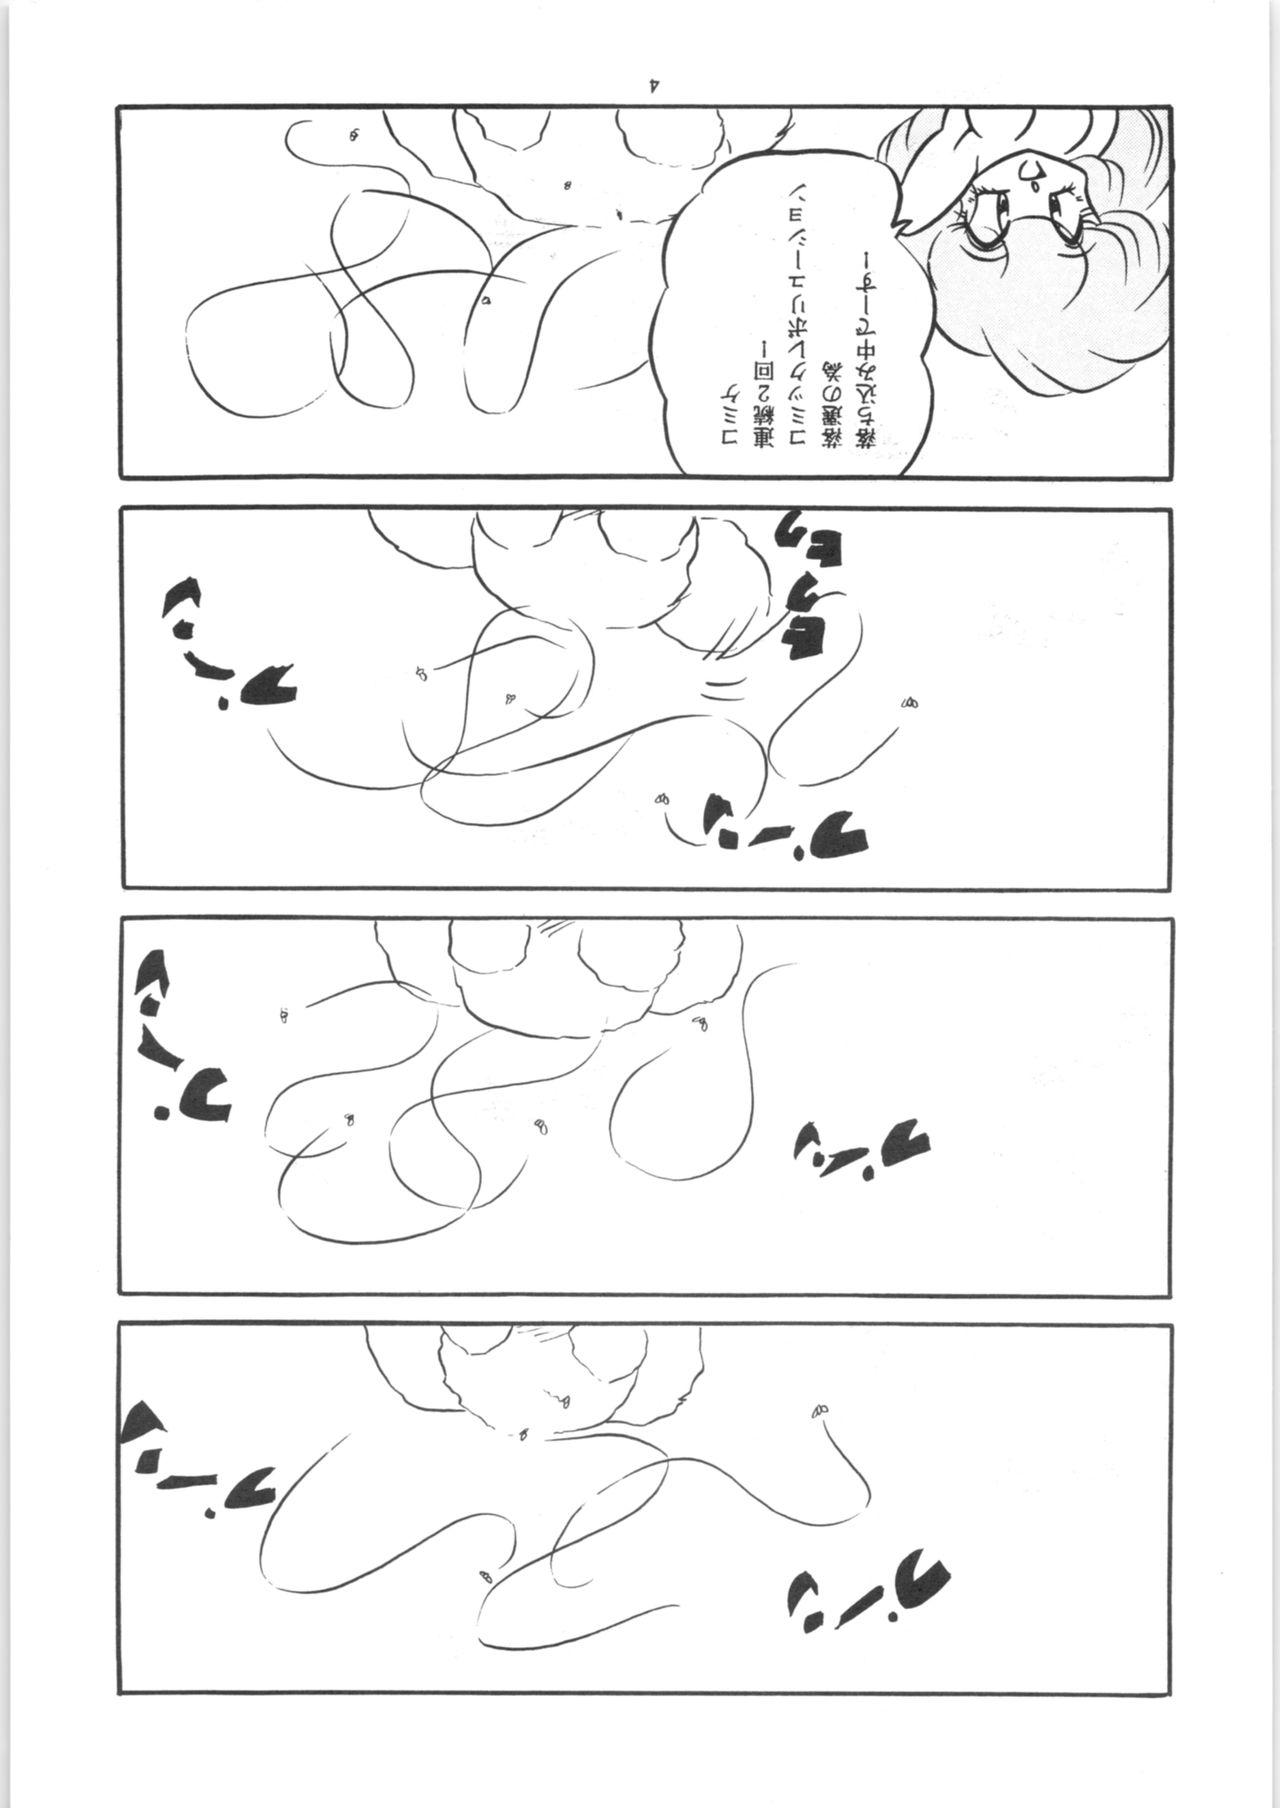 Socks C-COMPANY SPECIAL STAGE 18 - Ranma 12 Idol project Classy - Page 4